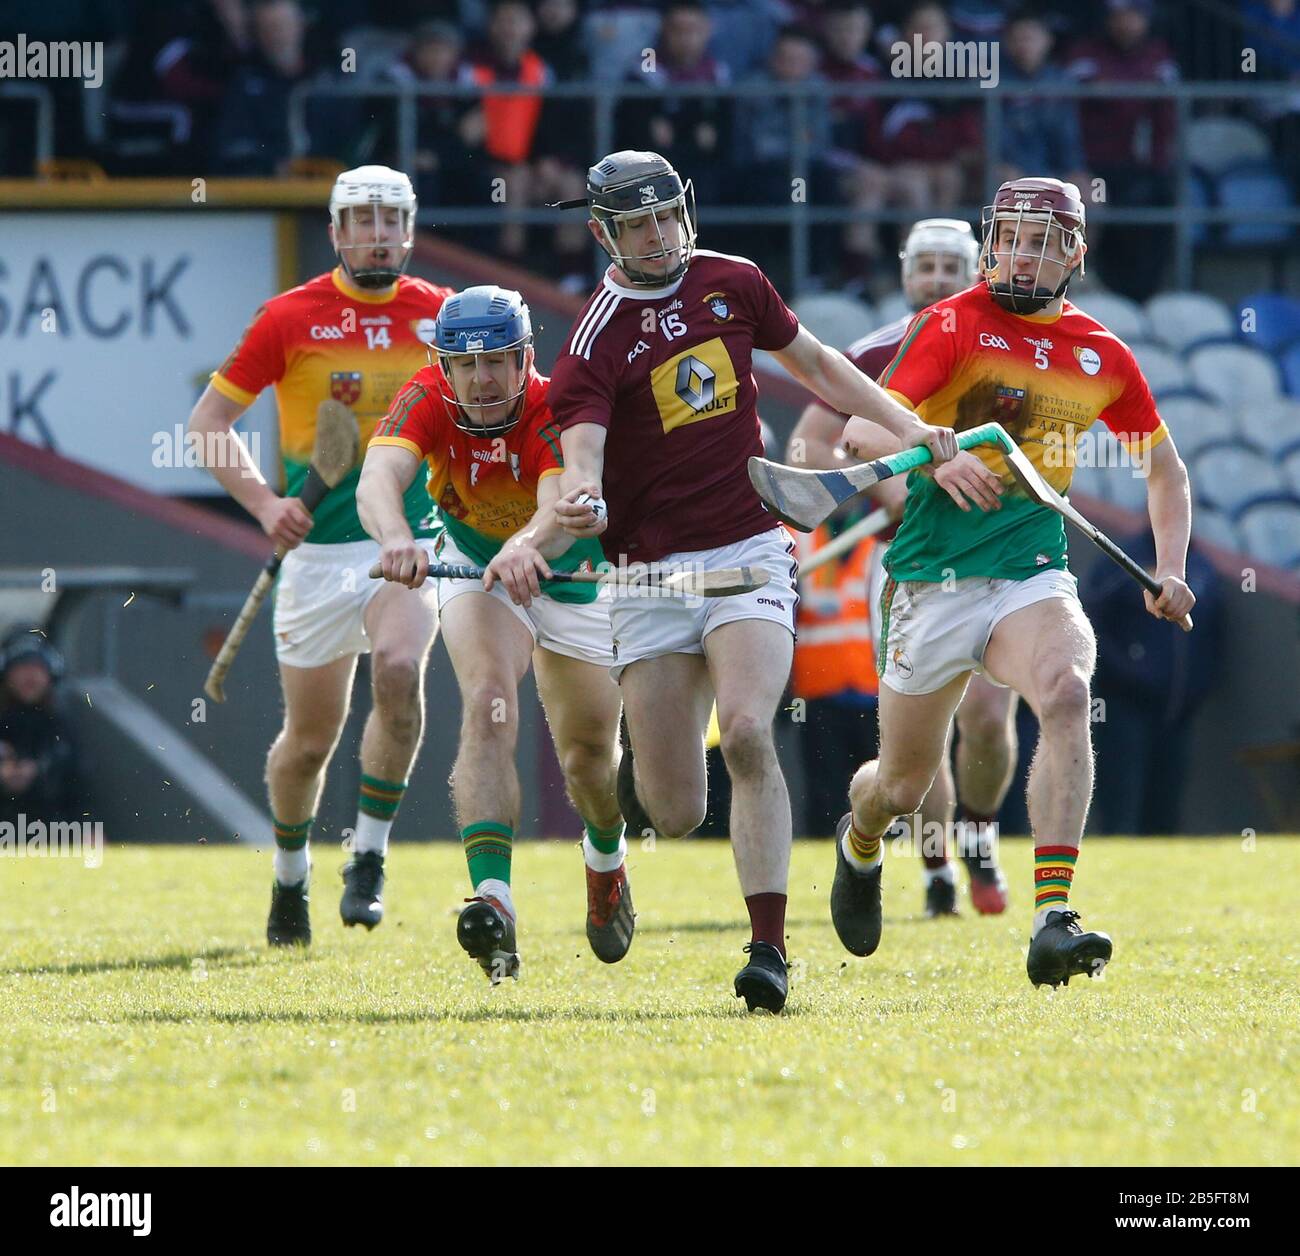 8th March 2020; TEG Cusack Park, Mullingar, Westmeath, Ireland; Allianz League Division 1 Hurling, Westmeath versus Carlow; Jack Galvin on an attacking run for Westmeath Stock Photo